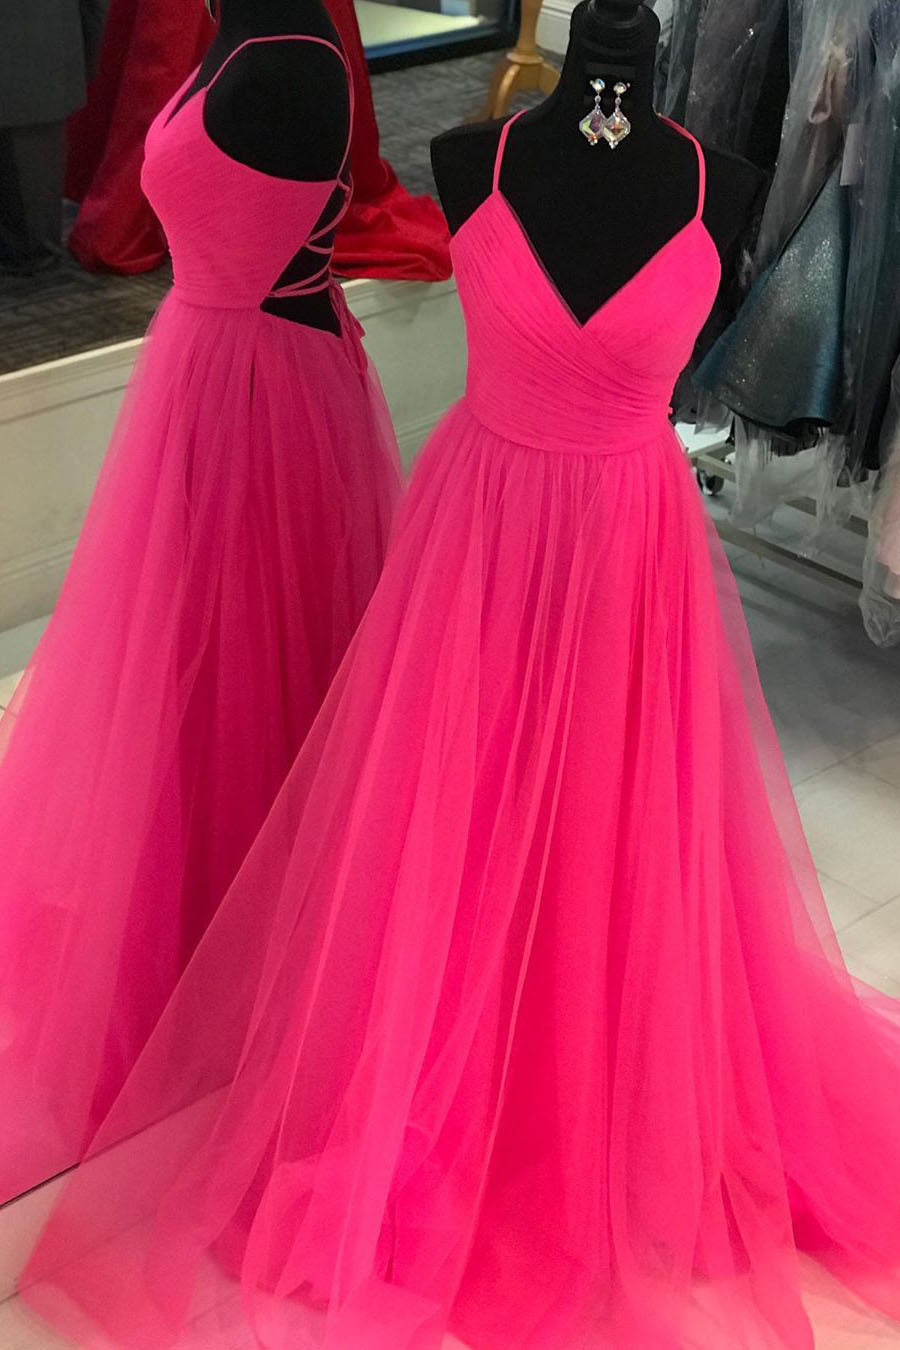 Homecoming Dress 2033, V Neck A-line Hot Pink Long Prom Dress with Lace-up Back